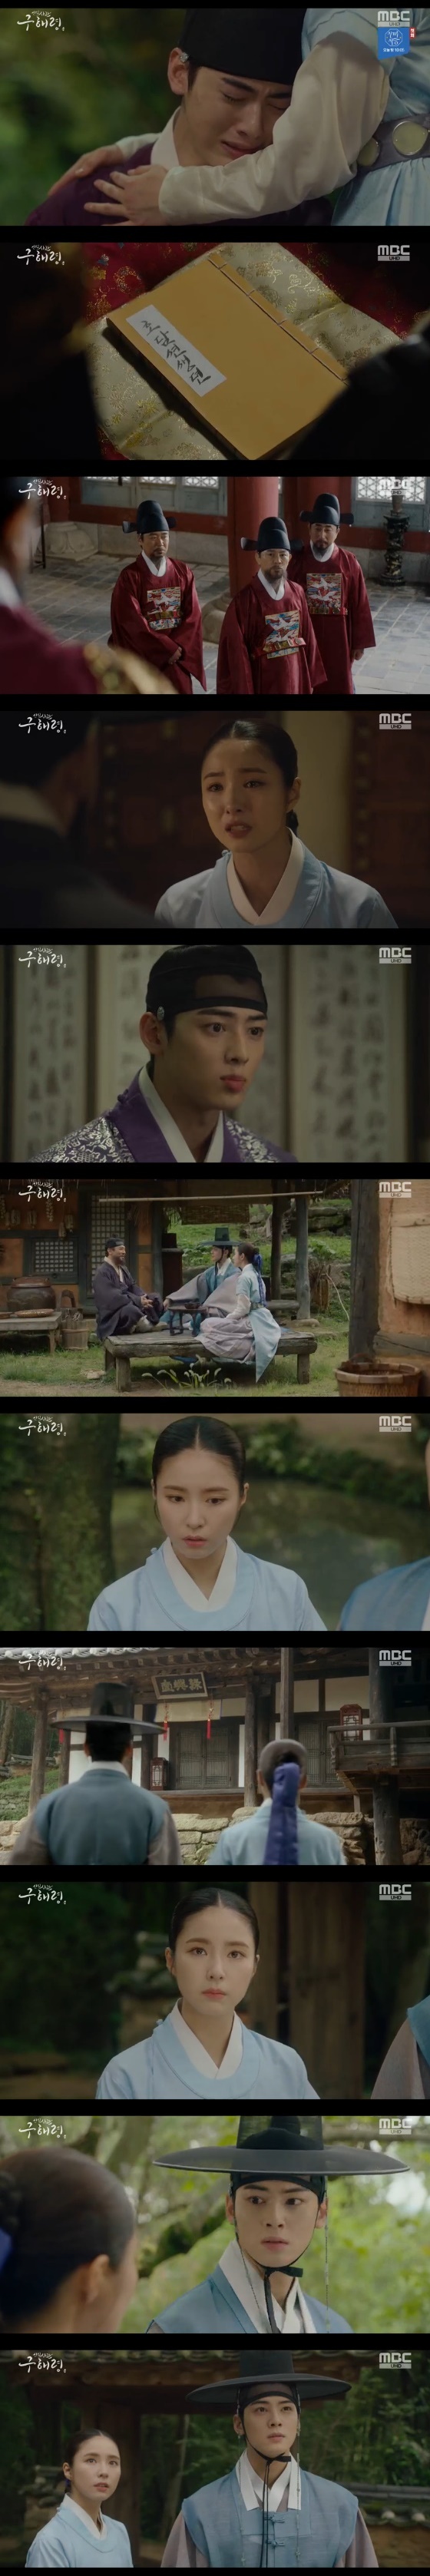 Seoul =) = Can new officer Rookie Historian Goo Hae-ryung Shin Se-kyung, Cha Eun-woo find the Sacho?In the MBC drama The New Entrepreneur Rookie Historian Goo Hae-ryung broadcasted on the afternoon of the 19th, Mrs. Rookie Historian Goo Hae-ryung (Shin Se-kyung) and Dowon Daegun Yirim (Cha Eun-woo) I know him.Irim went to visit the king Lee Tae (Kim Min-sang), noticing that he had a secret of birth, and he knelt down to wait for his father, saying he wanted to see him, and finally faced him.Irim asked, Do you not love me as a son? But I could not hear any answer; eventually, Irim, in the arms of Rookie Historian Goo Hae-ryung, was a feverish one.After that, the Hodam Master was in the hands of the king. Everyone in the palace read the Hodam Master.The Hodam Teachers Exhibition is only a novel, but those who bring the gold book into the palace should be punished for high treason.Please take care of this calmly, he said.Rookie Historian Goo Hae-ryung visited the bookstore, saying he would seek a private librarian with history.And I realized that Hodam was a book written by my brother, Koo Jae-kyung (Fairy Hwan).Rookie Historian Goo Hae-ryung asked why he did not tell his brother, but Koo Jae-kyung said, It was your promise to save you.So do not get closer anymore, but stay alive. Rookie Historian Goo Hae-ryung and Irim were told that there were still some of the four seconds written 20 years ago.Especially, Irim knew that he had to go to the island with a blue forest.Irim, who went to the Greenery Party where he lived. Asked Rookie Historian Goo Hae-ryung, Have you ever thought about what the Greenery Party means?Rookie Historian Goo Hae-ryung thought quietly, melt the pooh, stand the island; Irim said, a blue forested island, melted.It is noteworthy that they will be able to find the herbs while the place where the herbs are located is presumed to be the rust.New cadet Rookie Historian Goo Hae-ryung is broadcast every Wednesday and Thursday at 8:55 pm.